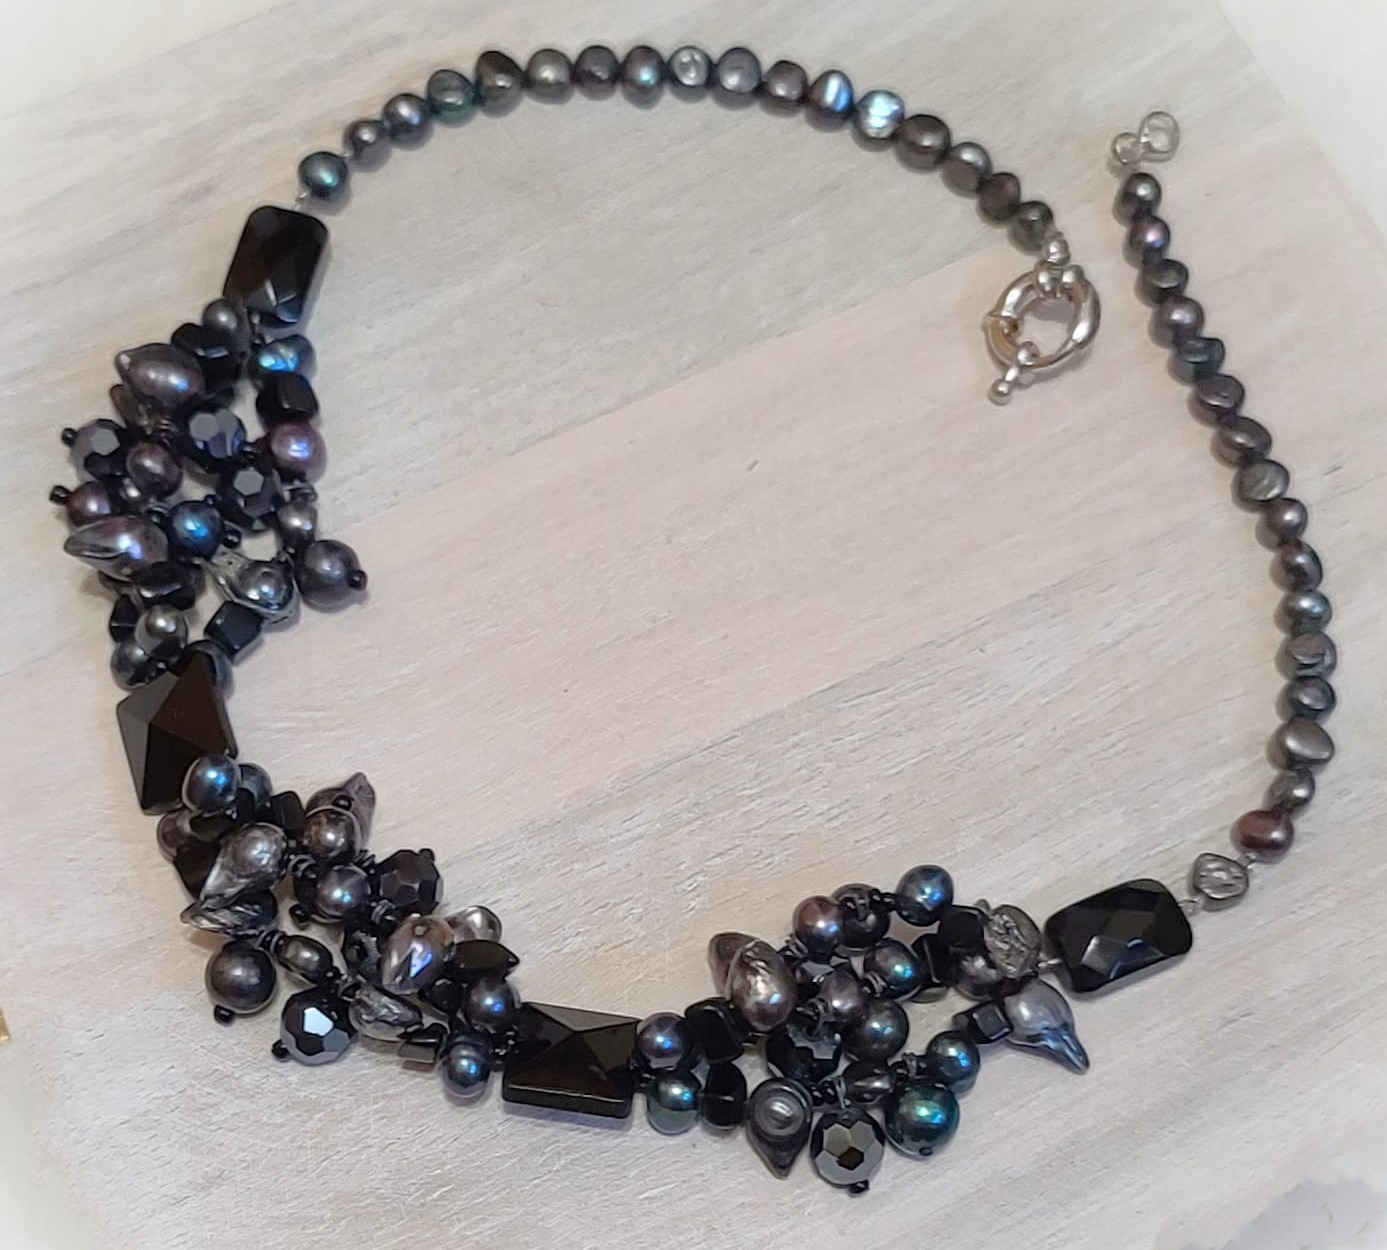 Peacock Pearl & Freshwater Pearls, Black Onyx Twist Necklace